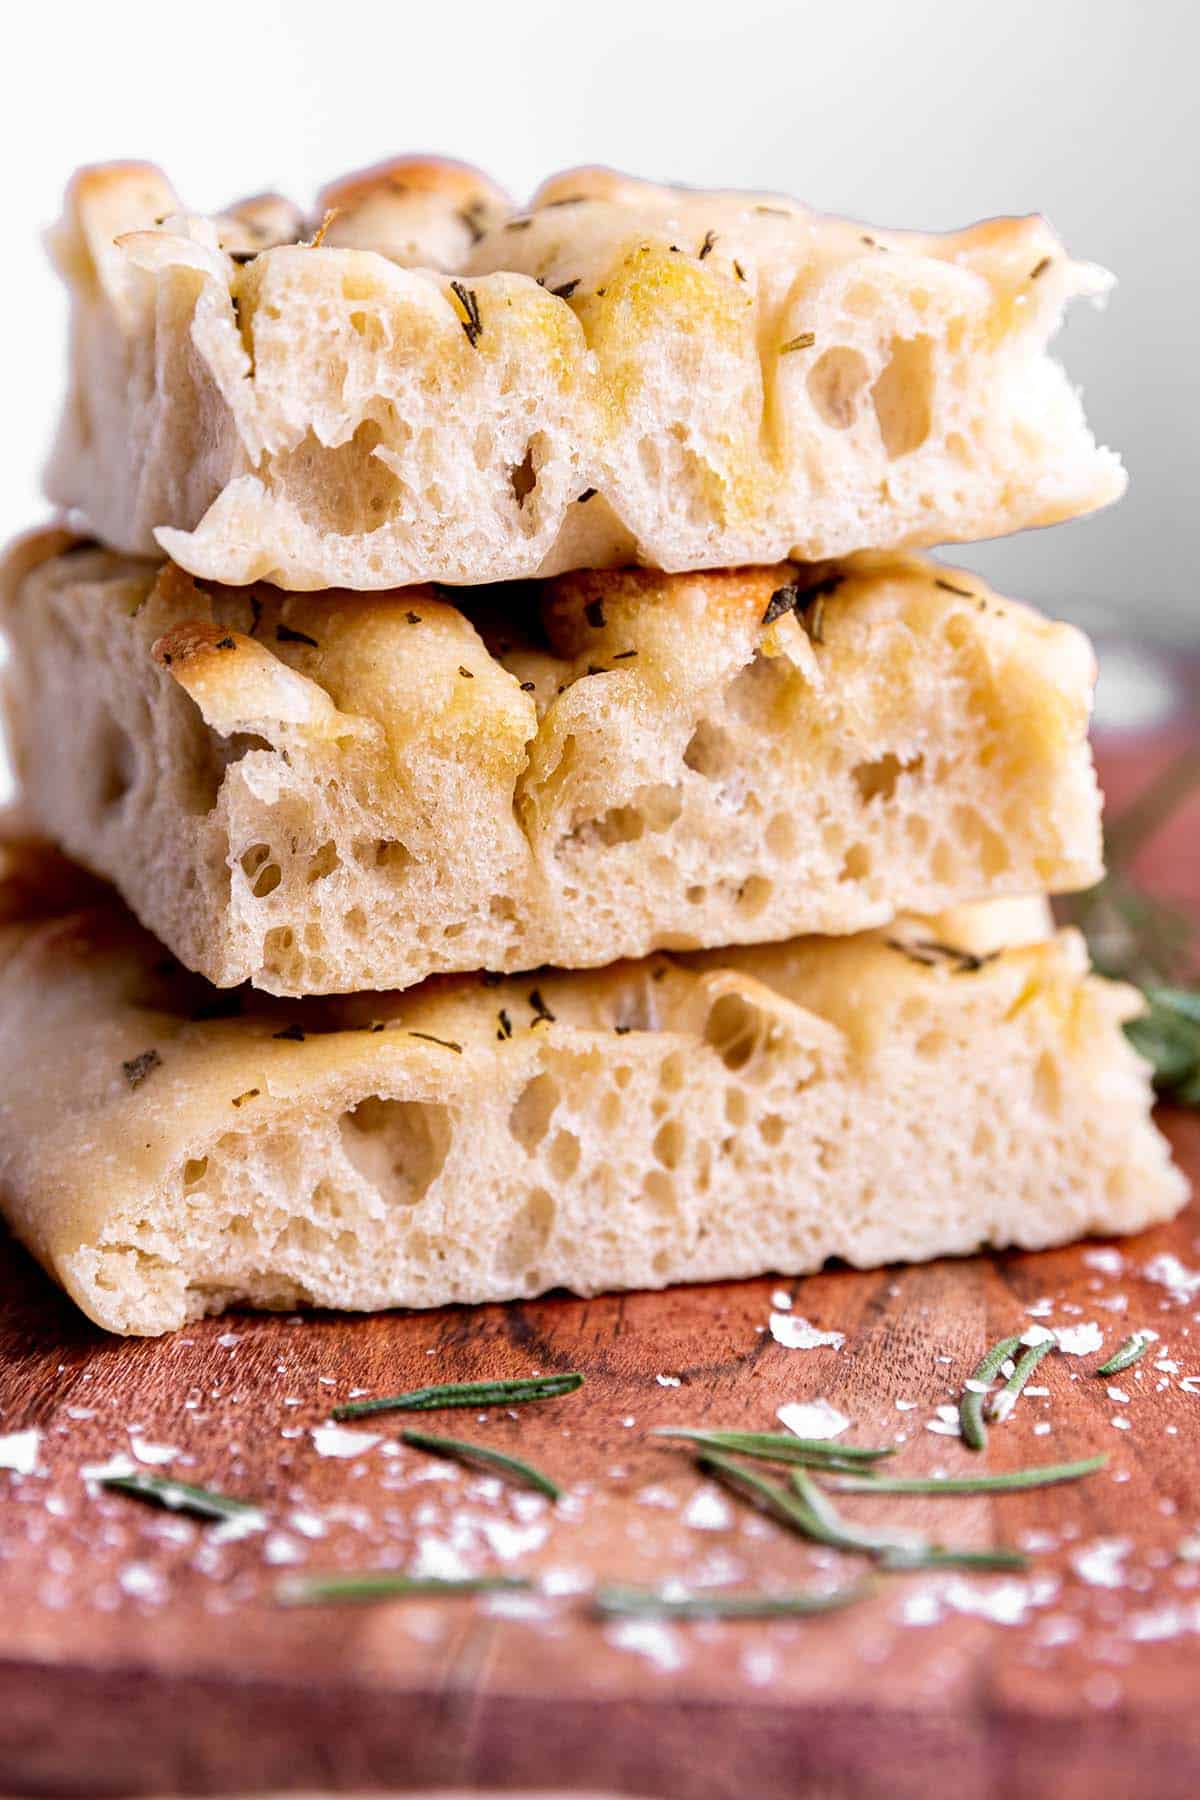 A stack of focaccia bread on a wooden board.